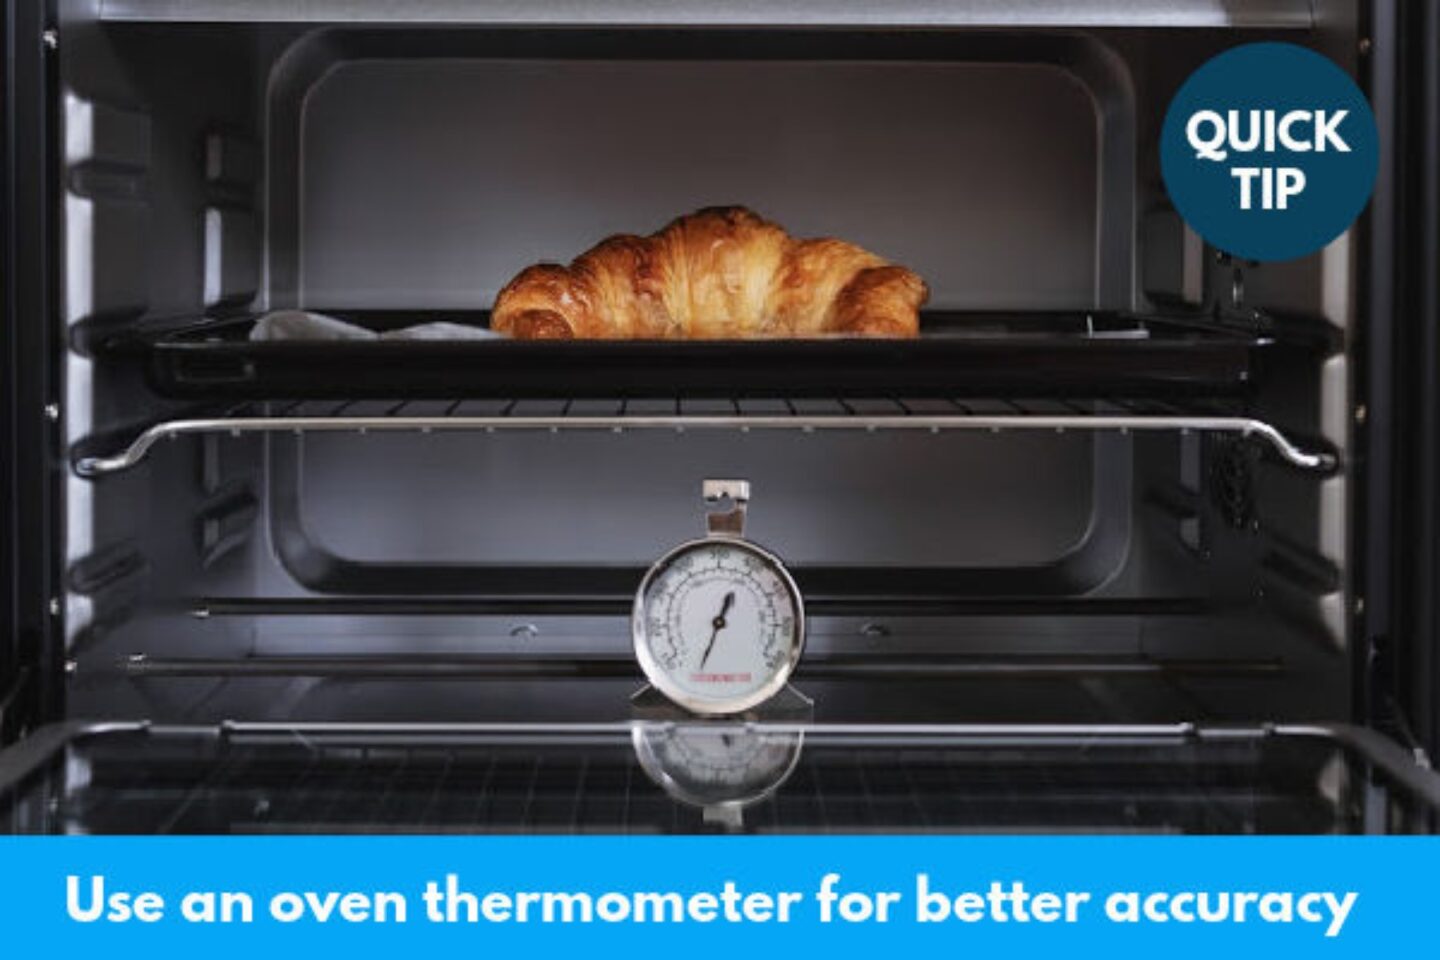 Oven preheating tip 2